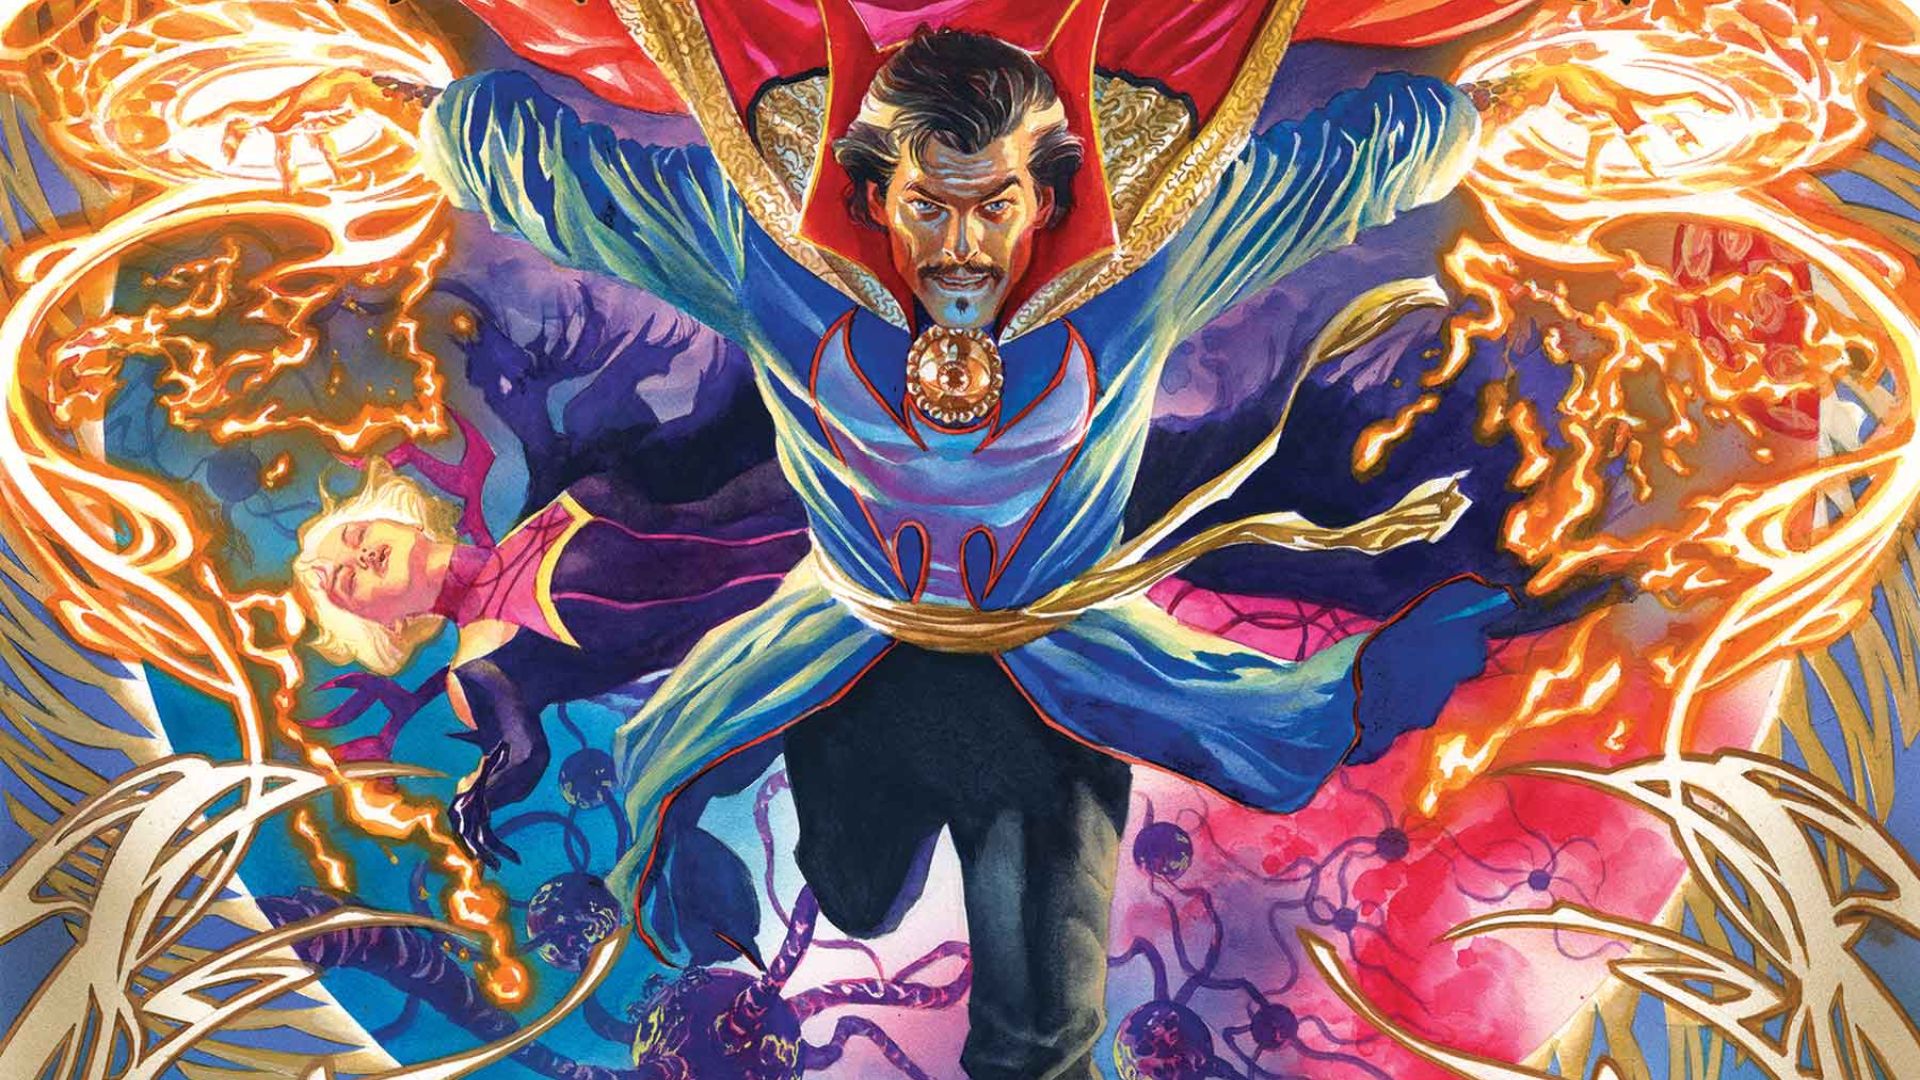  Doctor Strange is back from the dead and the Sorcerer Supreme again in a new ongoing title 